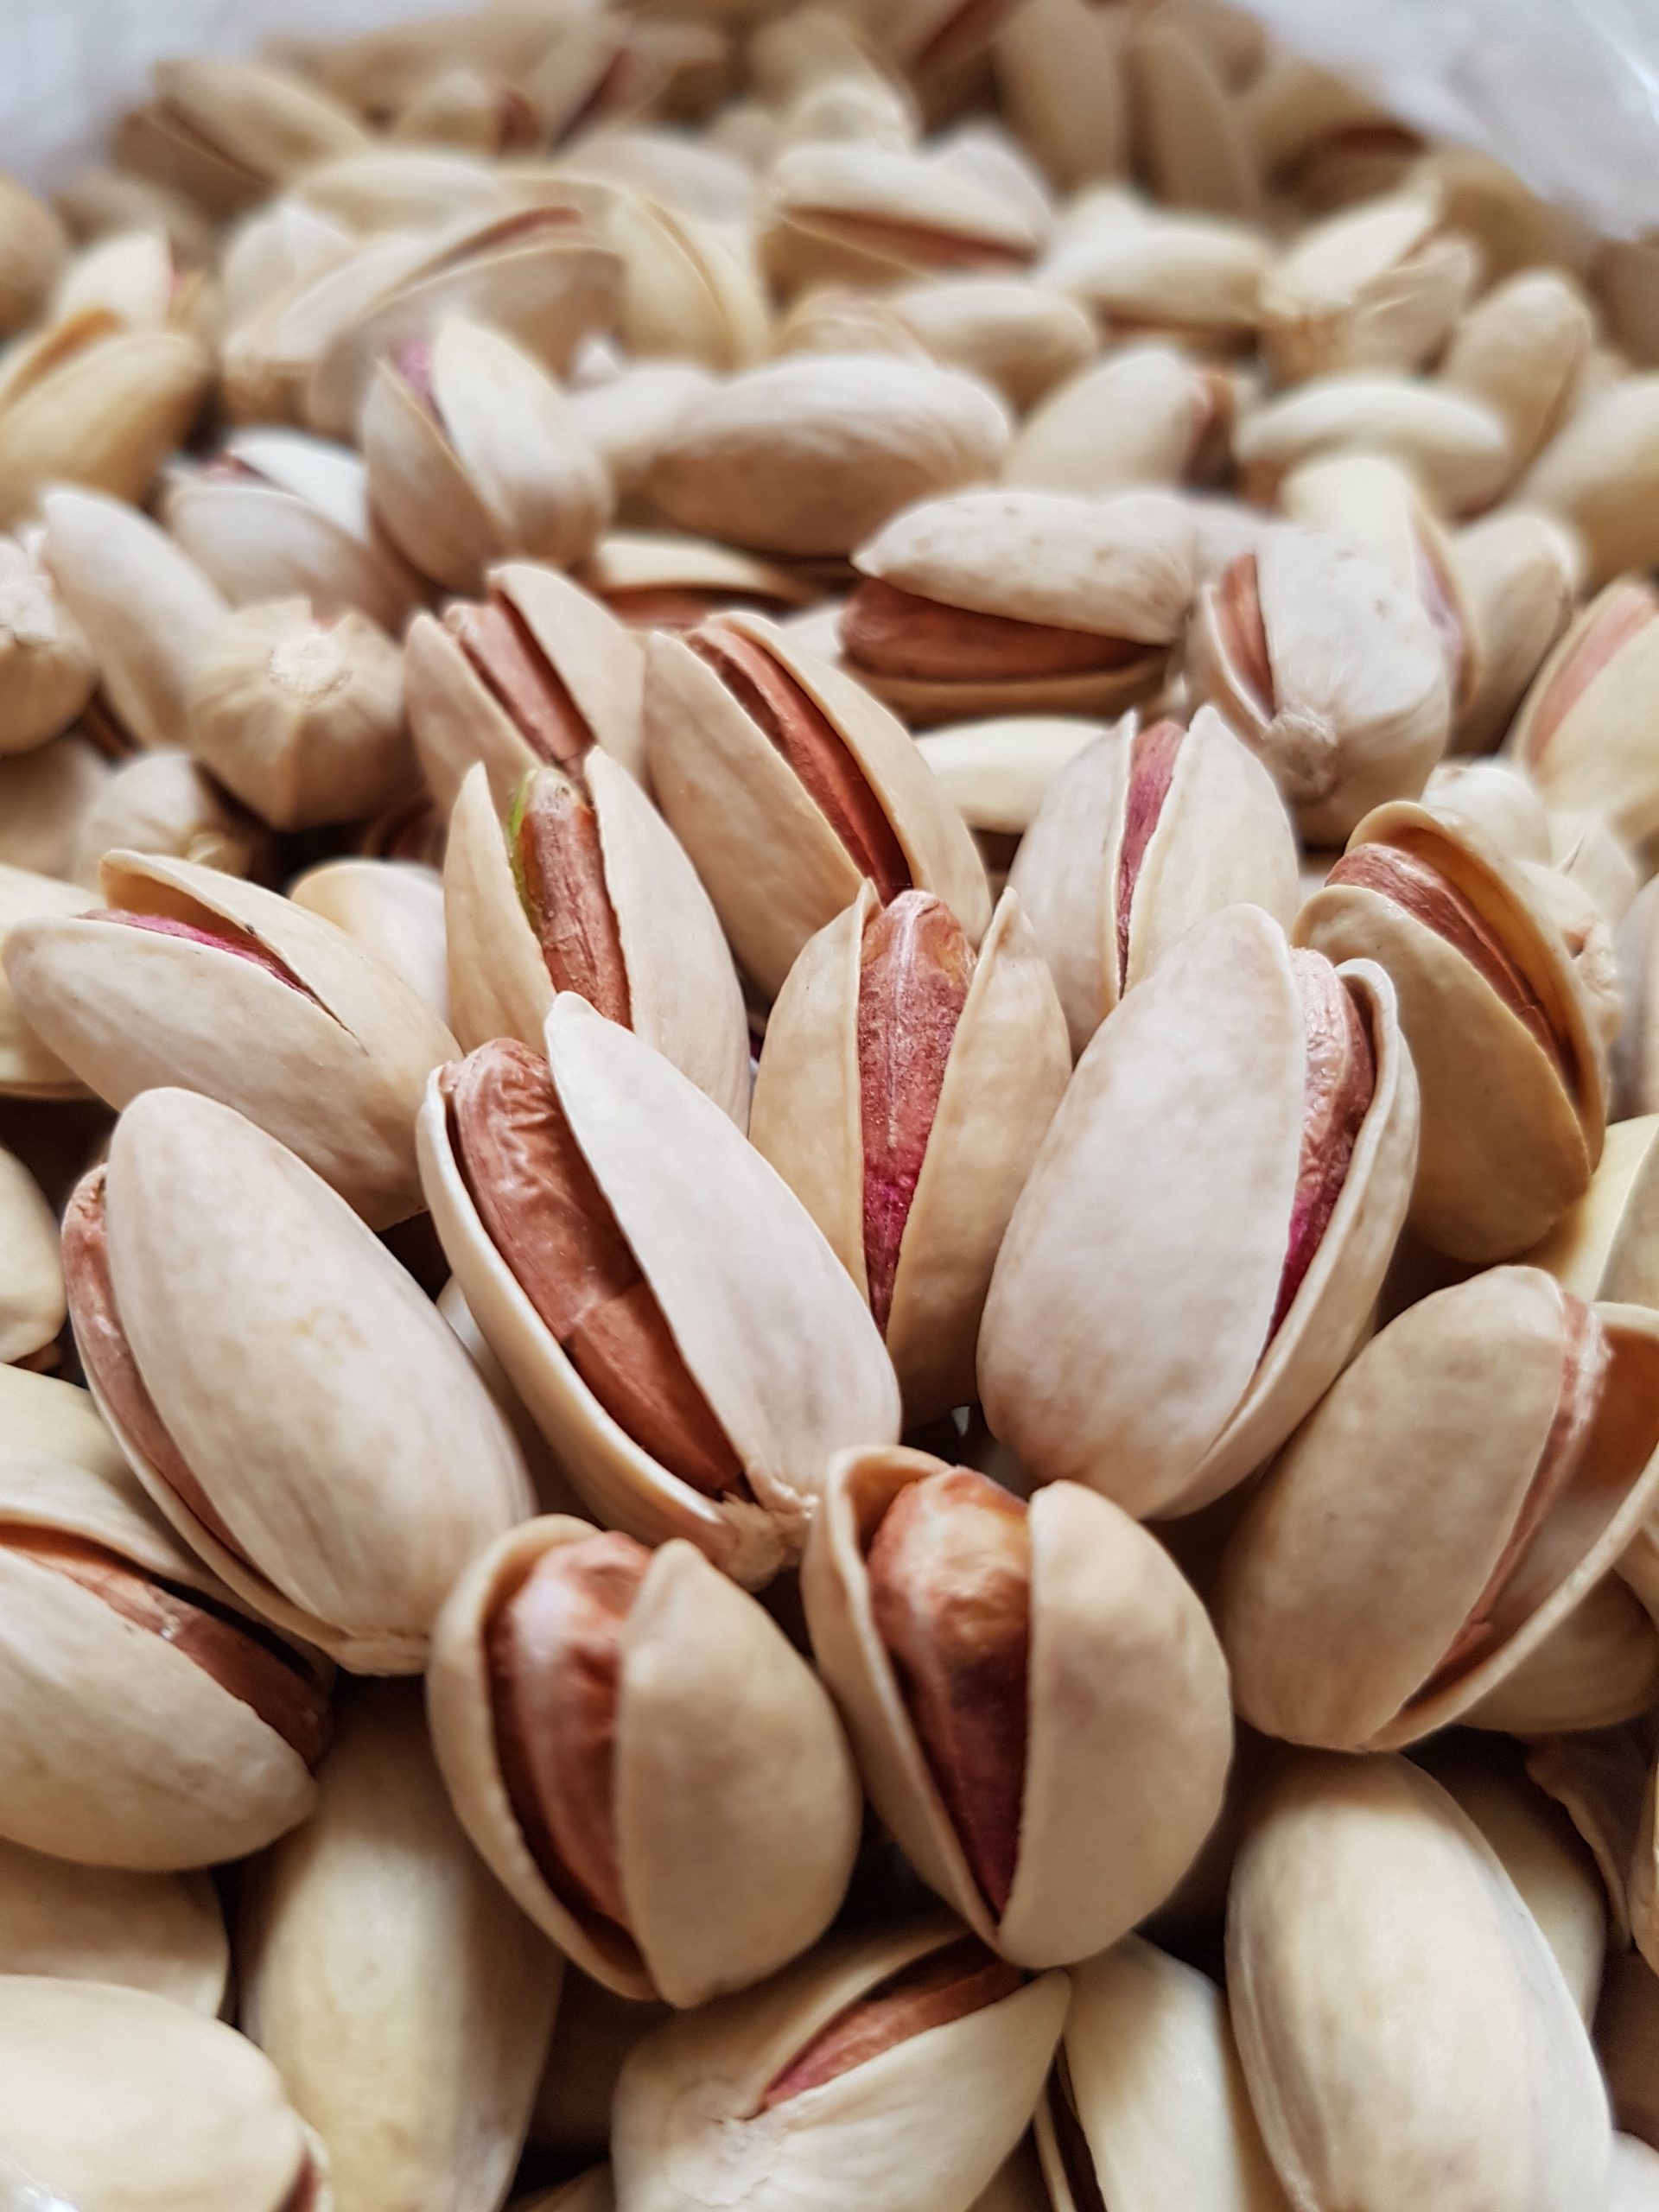 Export of Iranian smiling pistachios to Oman